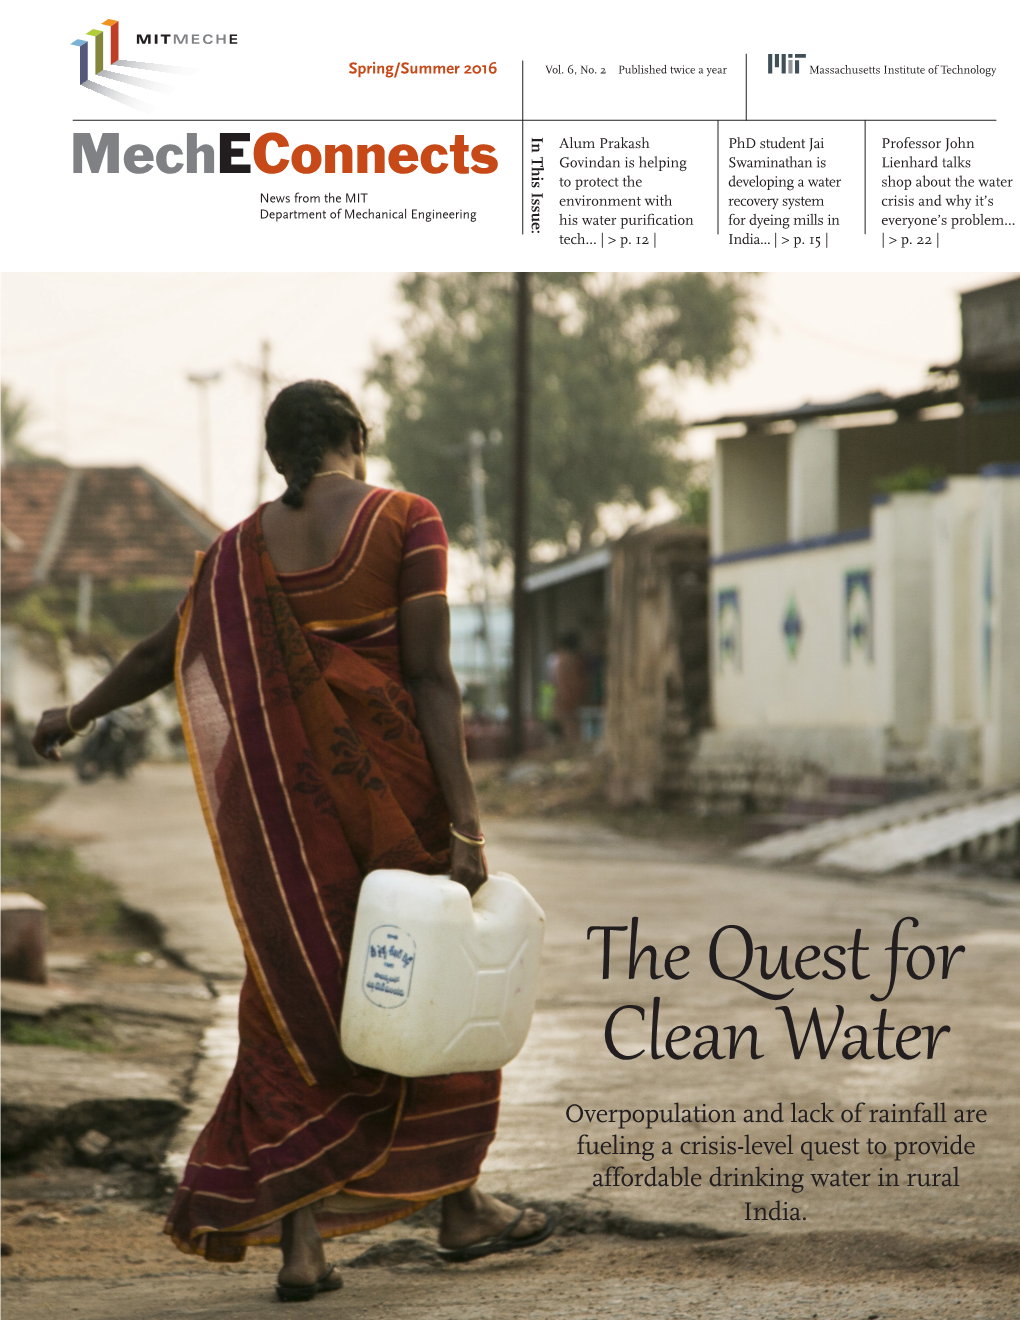 The Quest for Clean Water Overpopulation and Lack of Rainfall Are Fueling a Crisis-Level Quest to Provide Affordable Drinking Water in Rural India